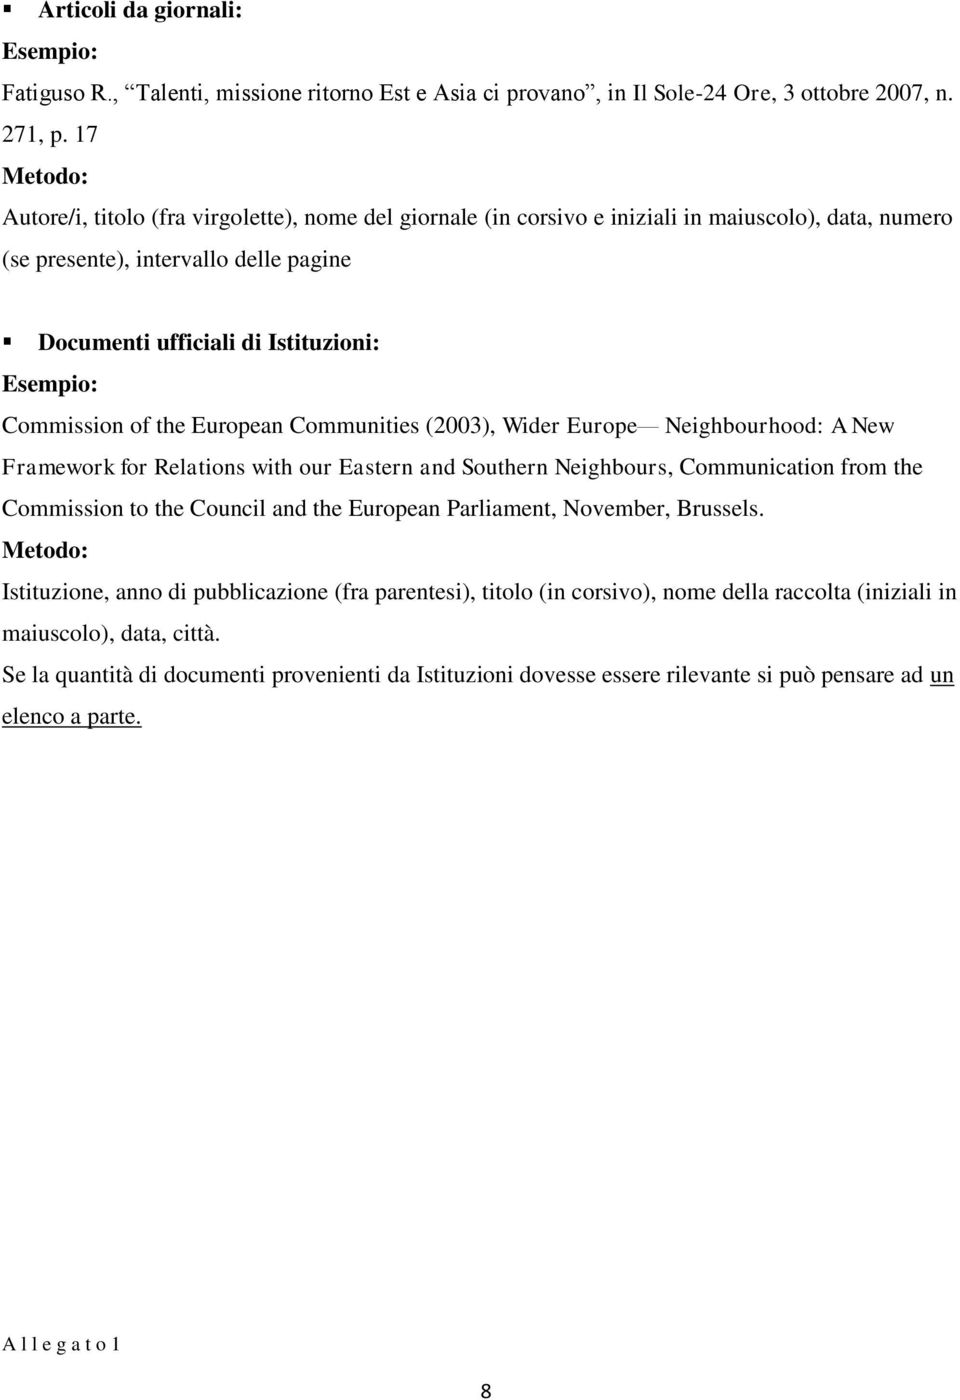 European Communities (2003), Wider Europe Neighbourhood: A New Framework for Relations with our Eastern and Southern Neighbours, Communication from the Commission to the Council and the European